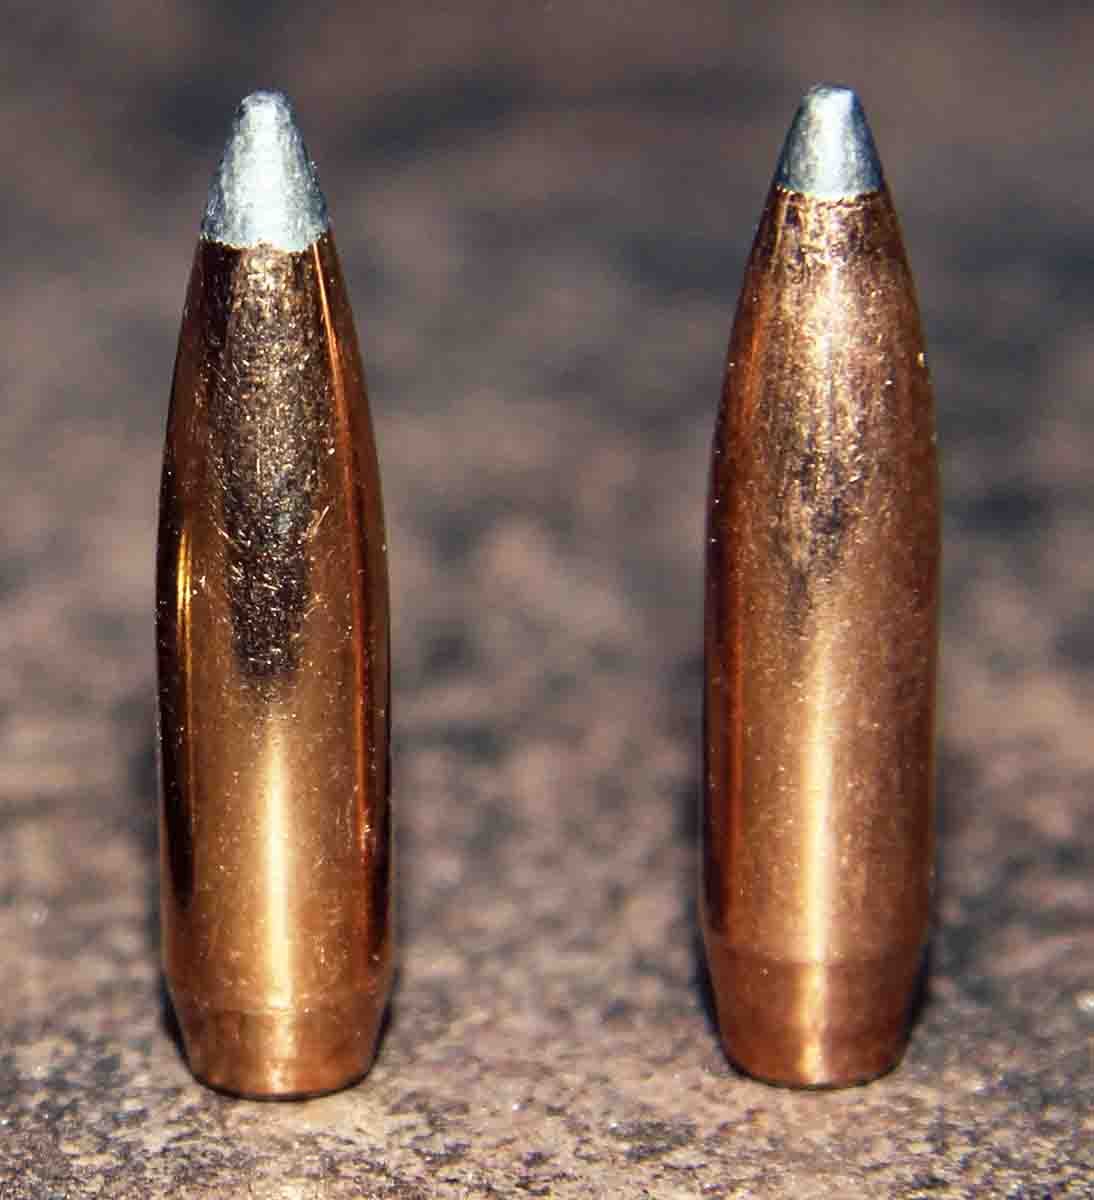 Bullets tested from Patrick’s custom 6mm Remington rifle included Speer’s 100-grain boat-tail softpoint, left, and Sierra’s 100-grain GameKing SBT.